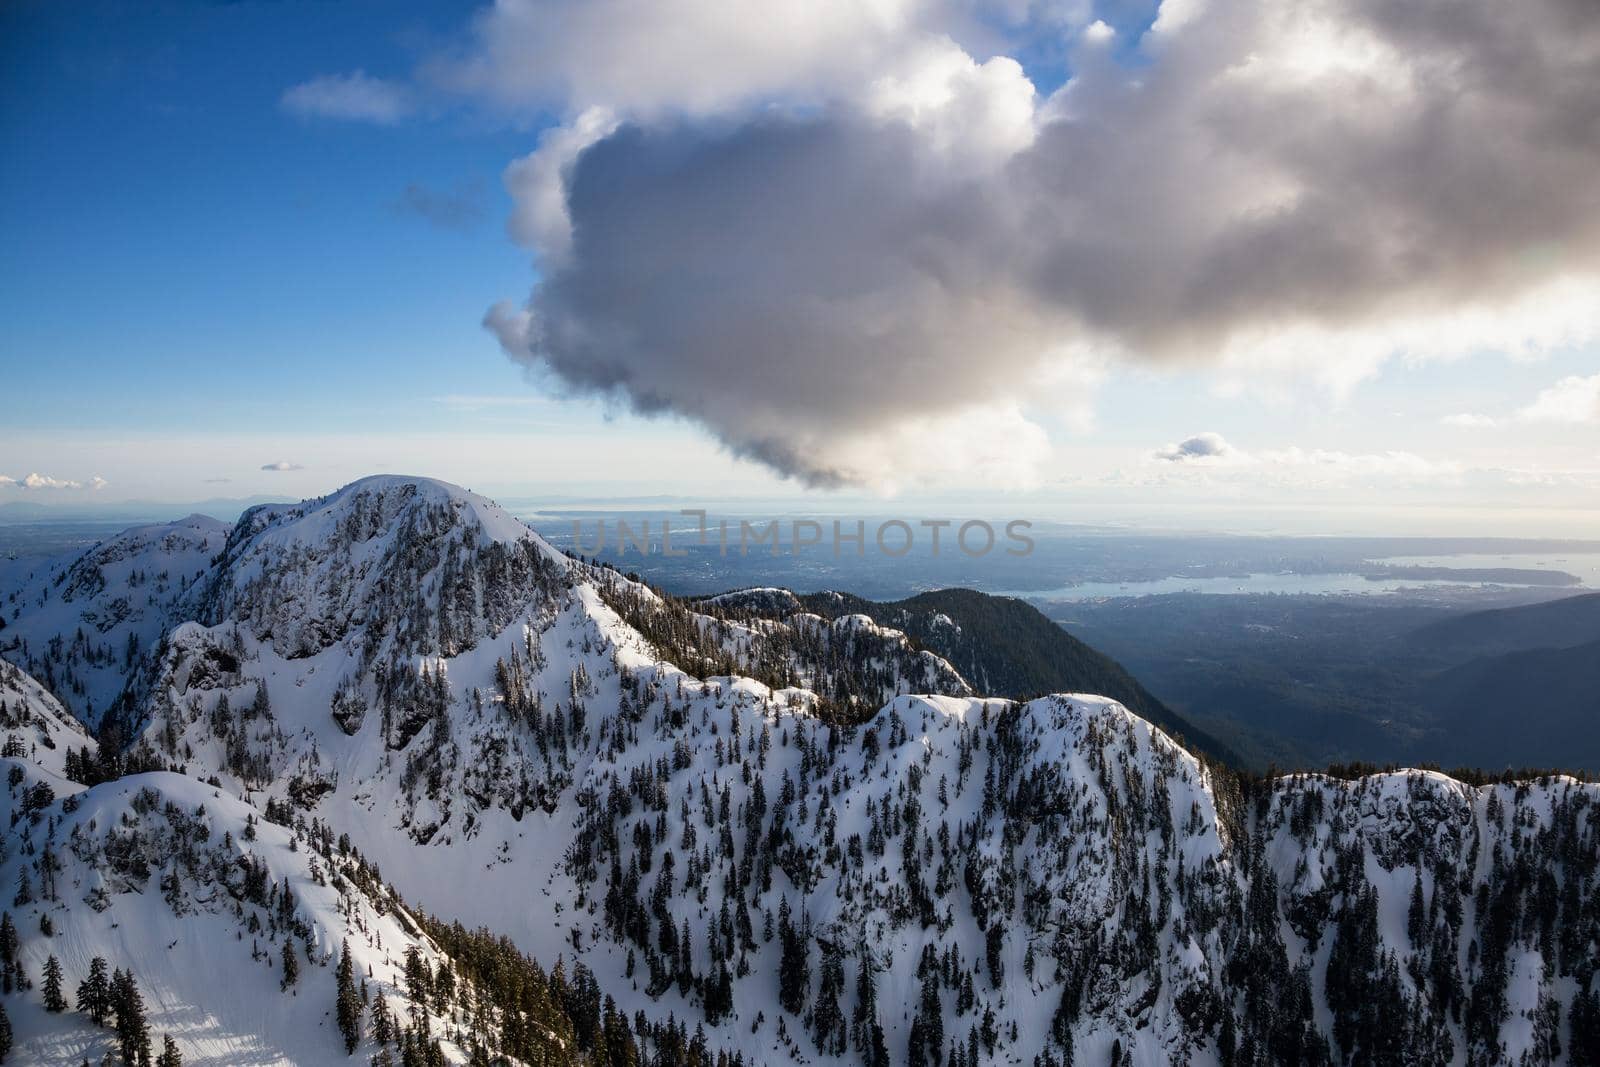 Aerial landscape view of Mt Seymour Provincial Park during a cloudy evening before sunset. Picture taken in Vancouver North Shore Mountains, BC, Canada.